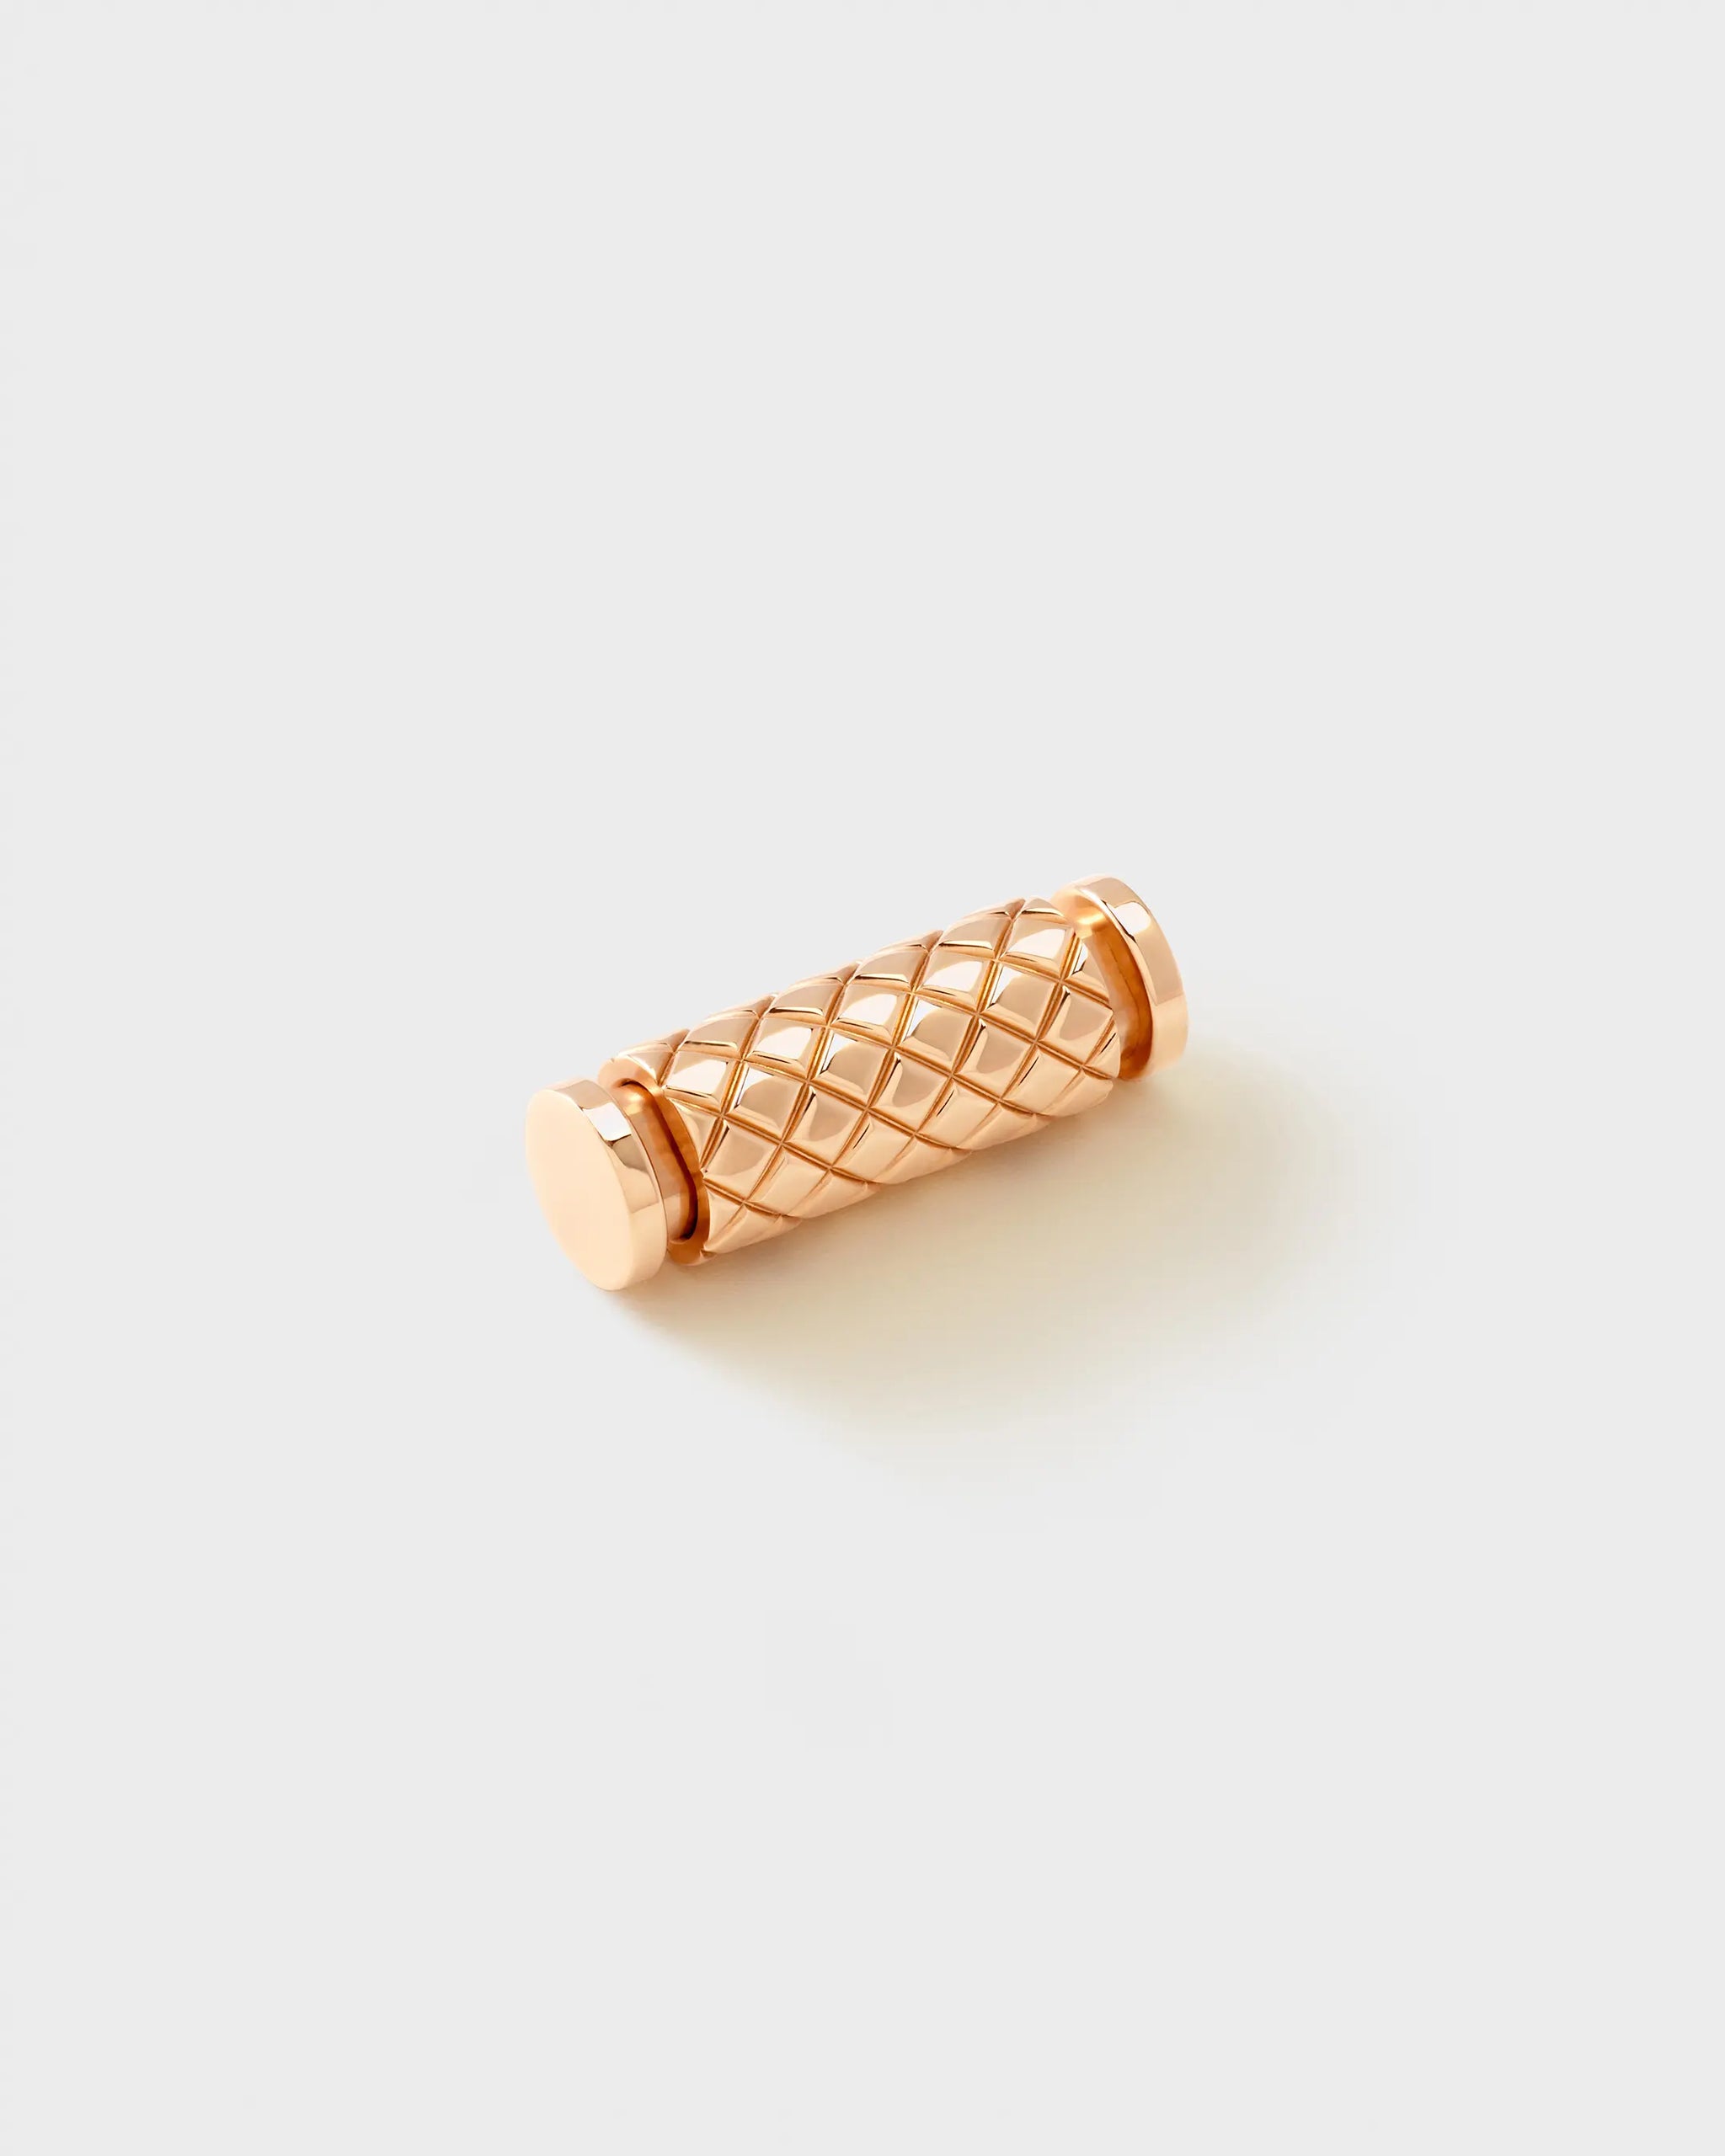 Latch Pendant in Rose Gold - 1 - Nouvel Heritage